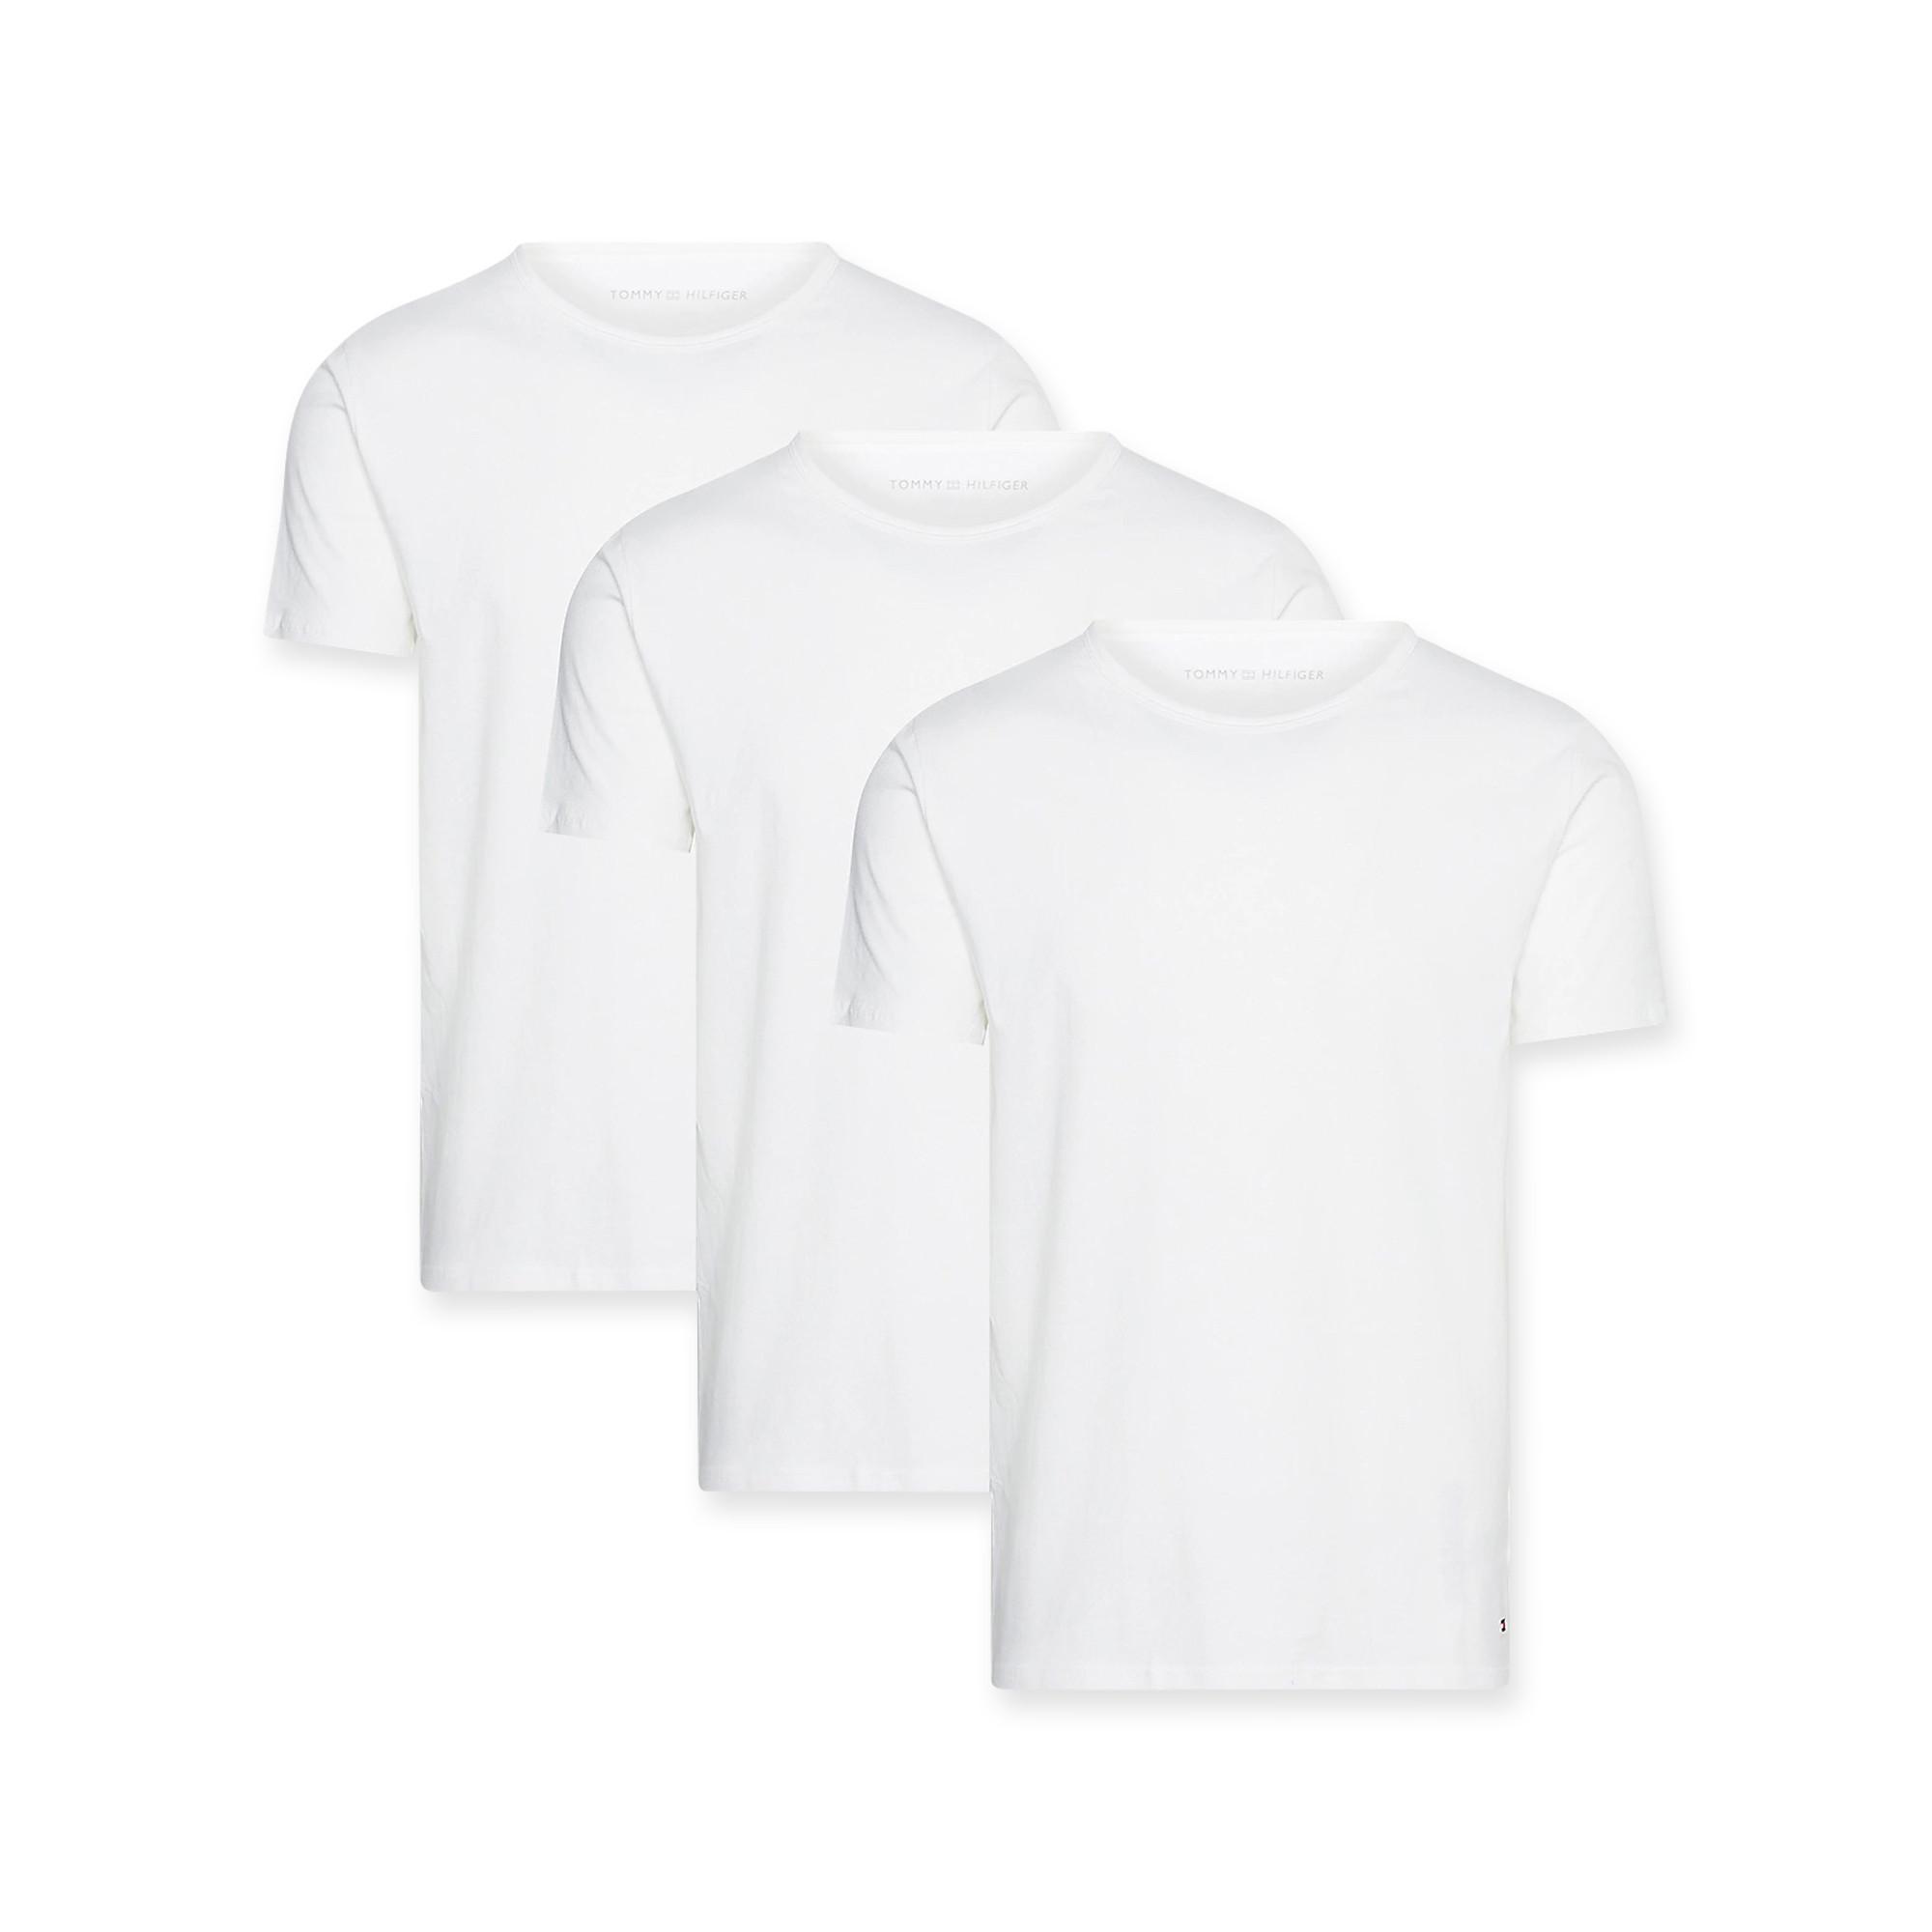 TOMMY HILFIGER CN TEE rundhals 3PACK Maillot de corps, manches courtes 